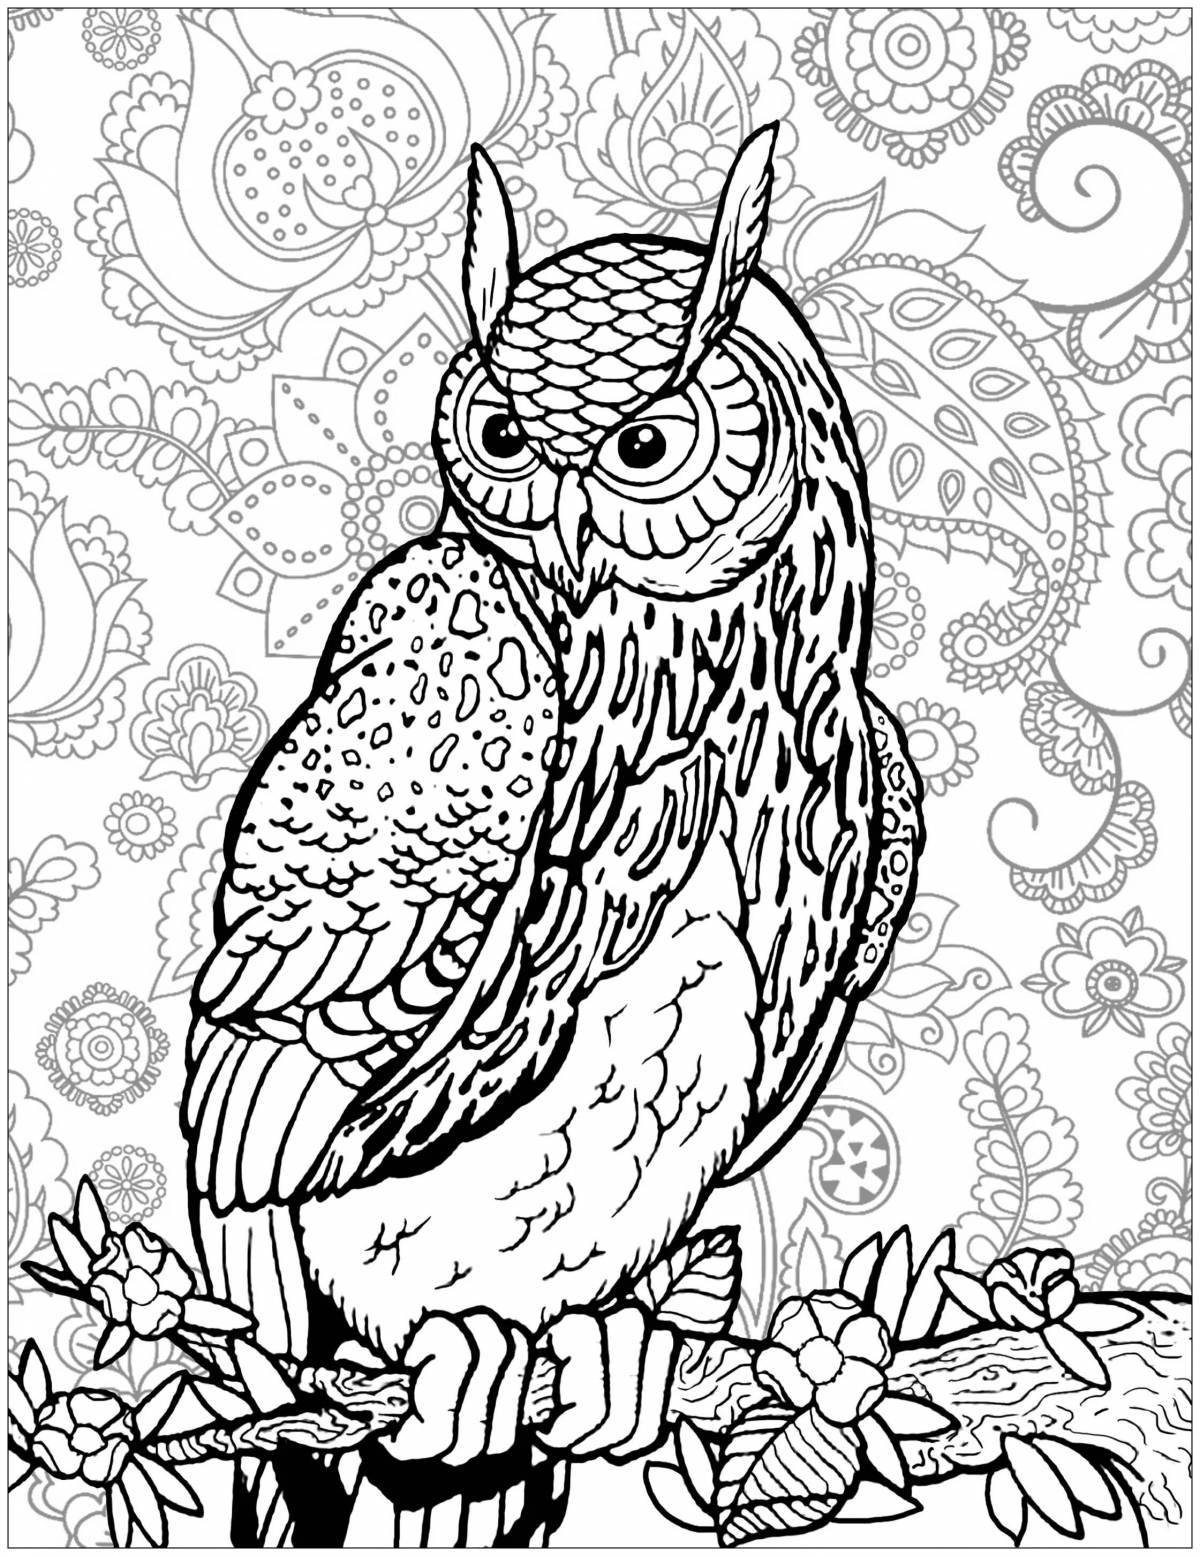 Royal long-eared owl coloring page